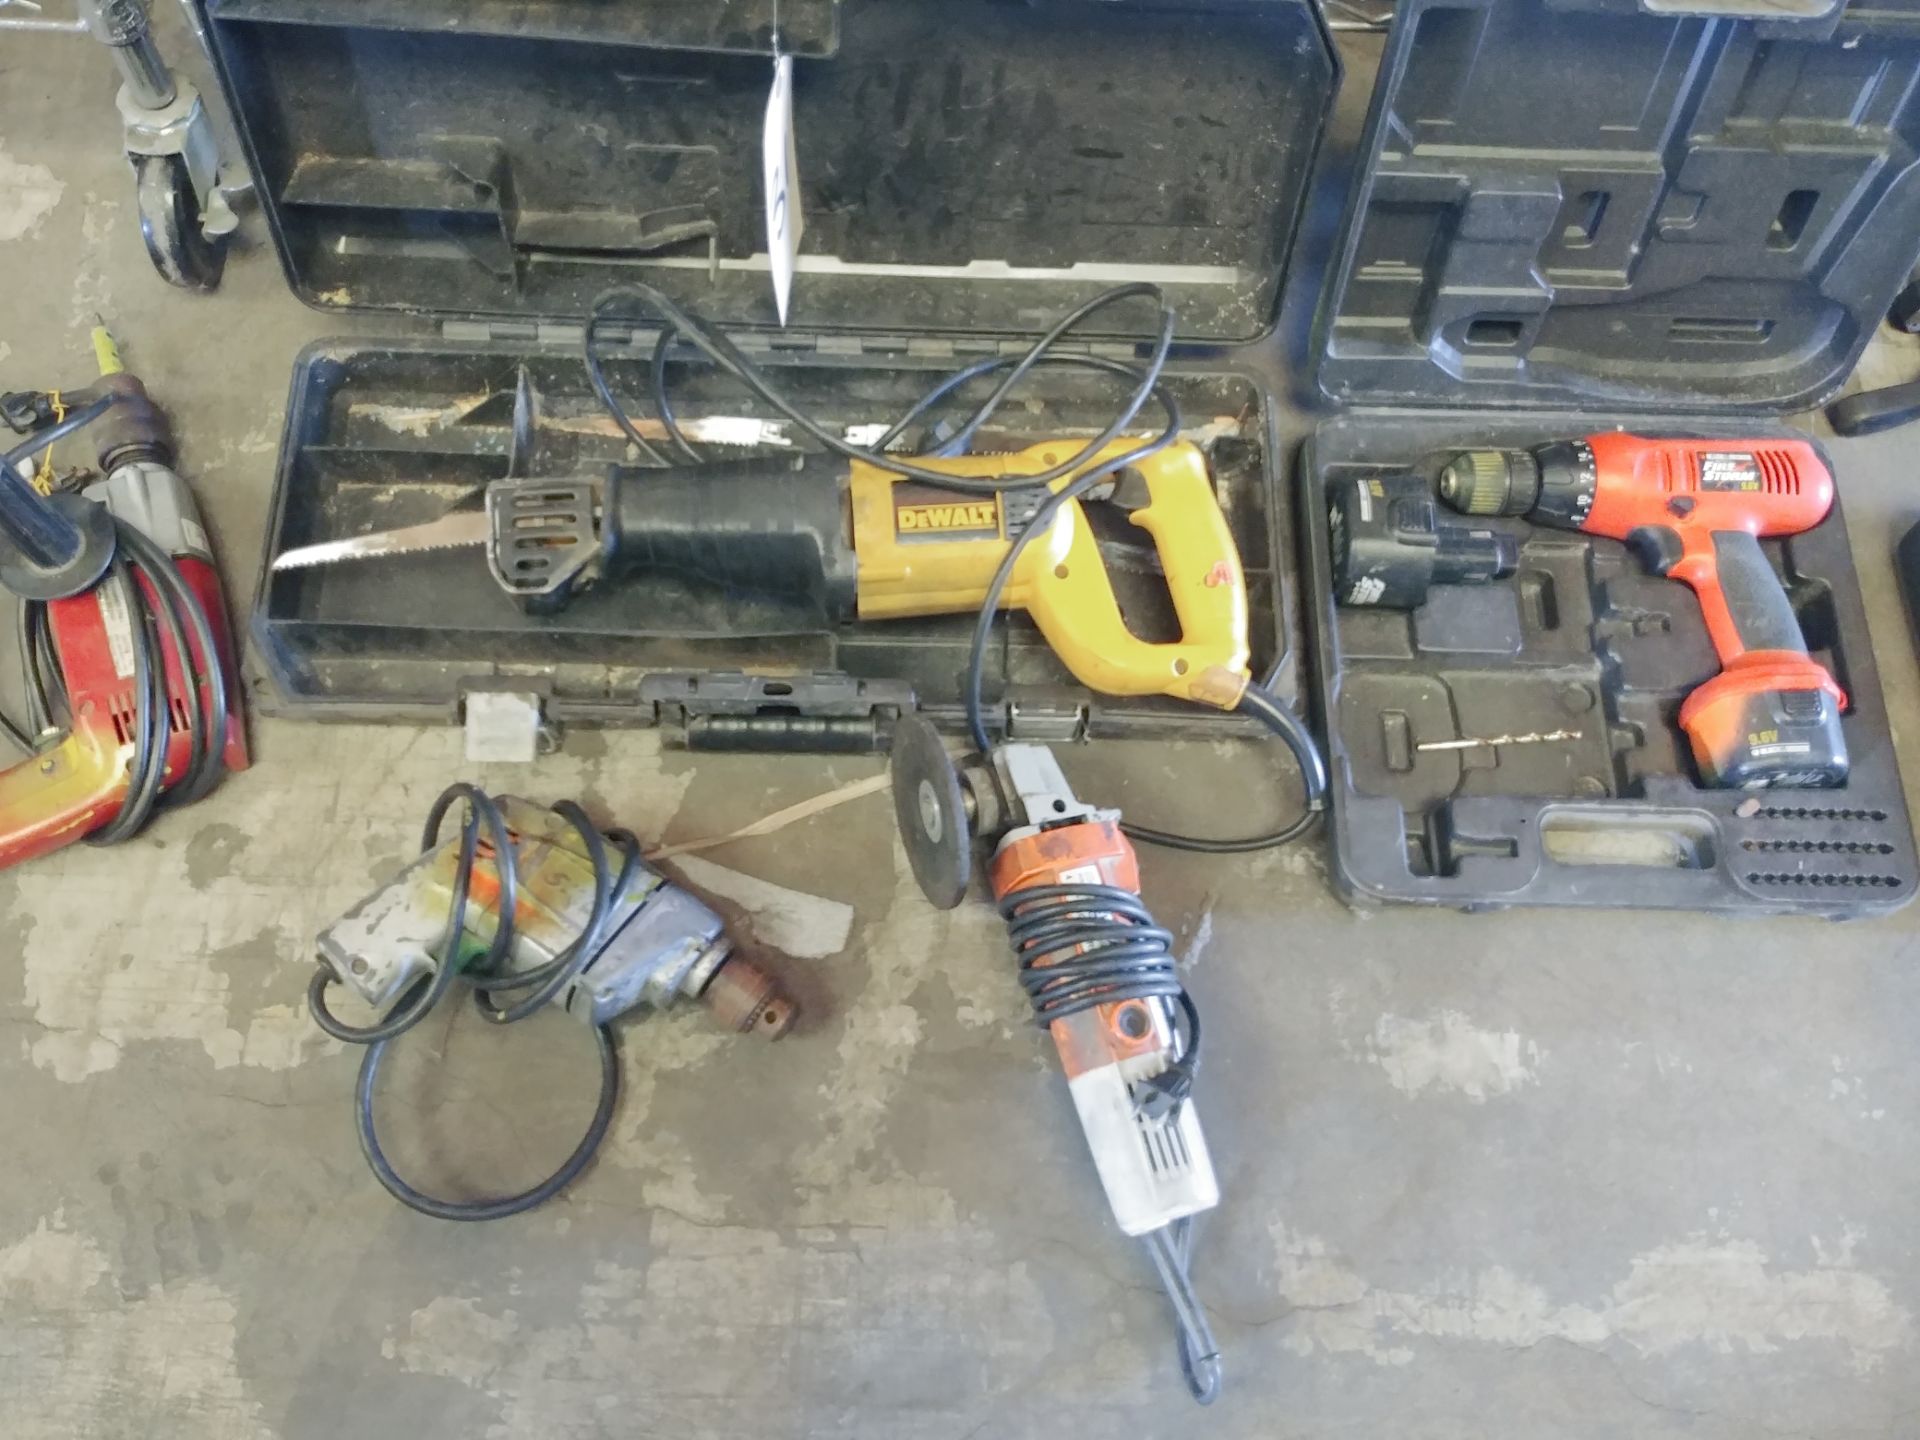 Lot of Power Tools - Sub to Bulk | Reqd Rig Fee: $25 or Hand Carry